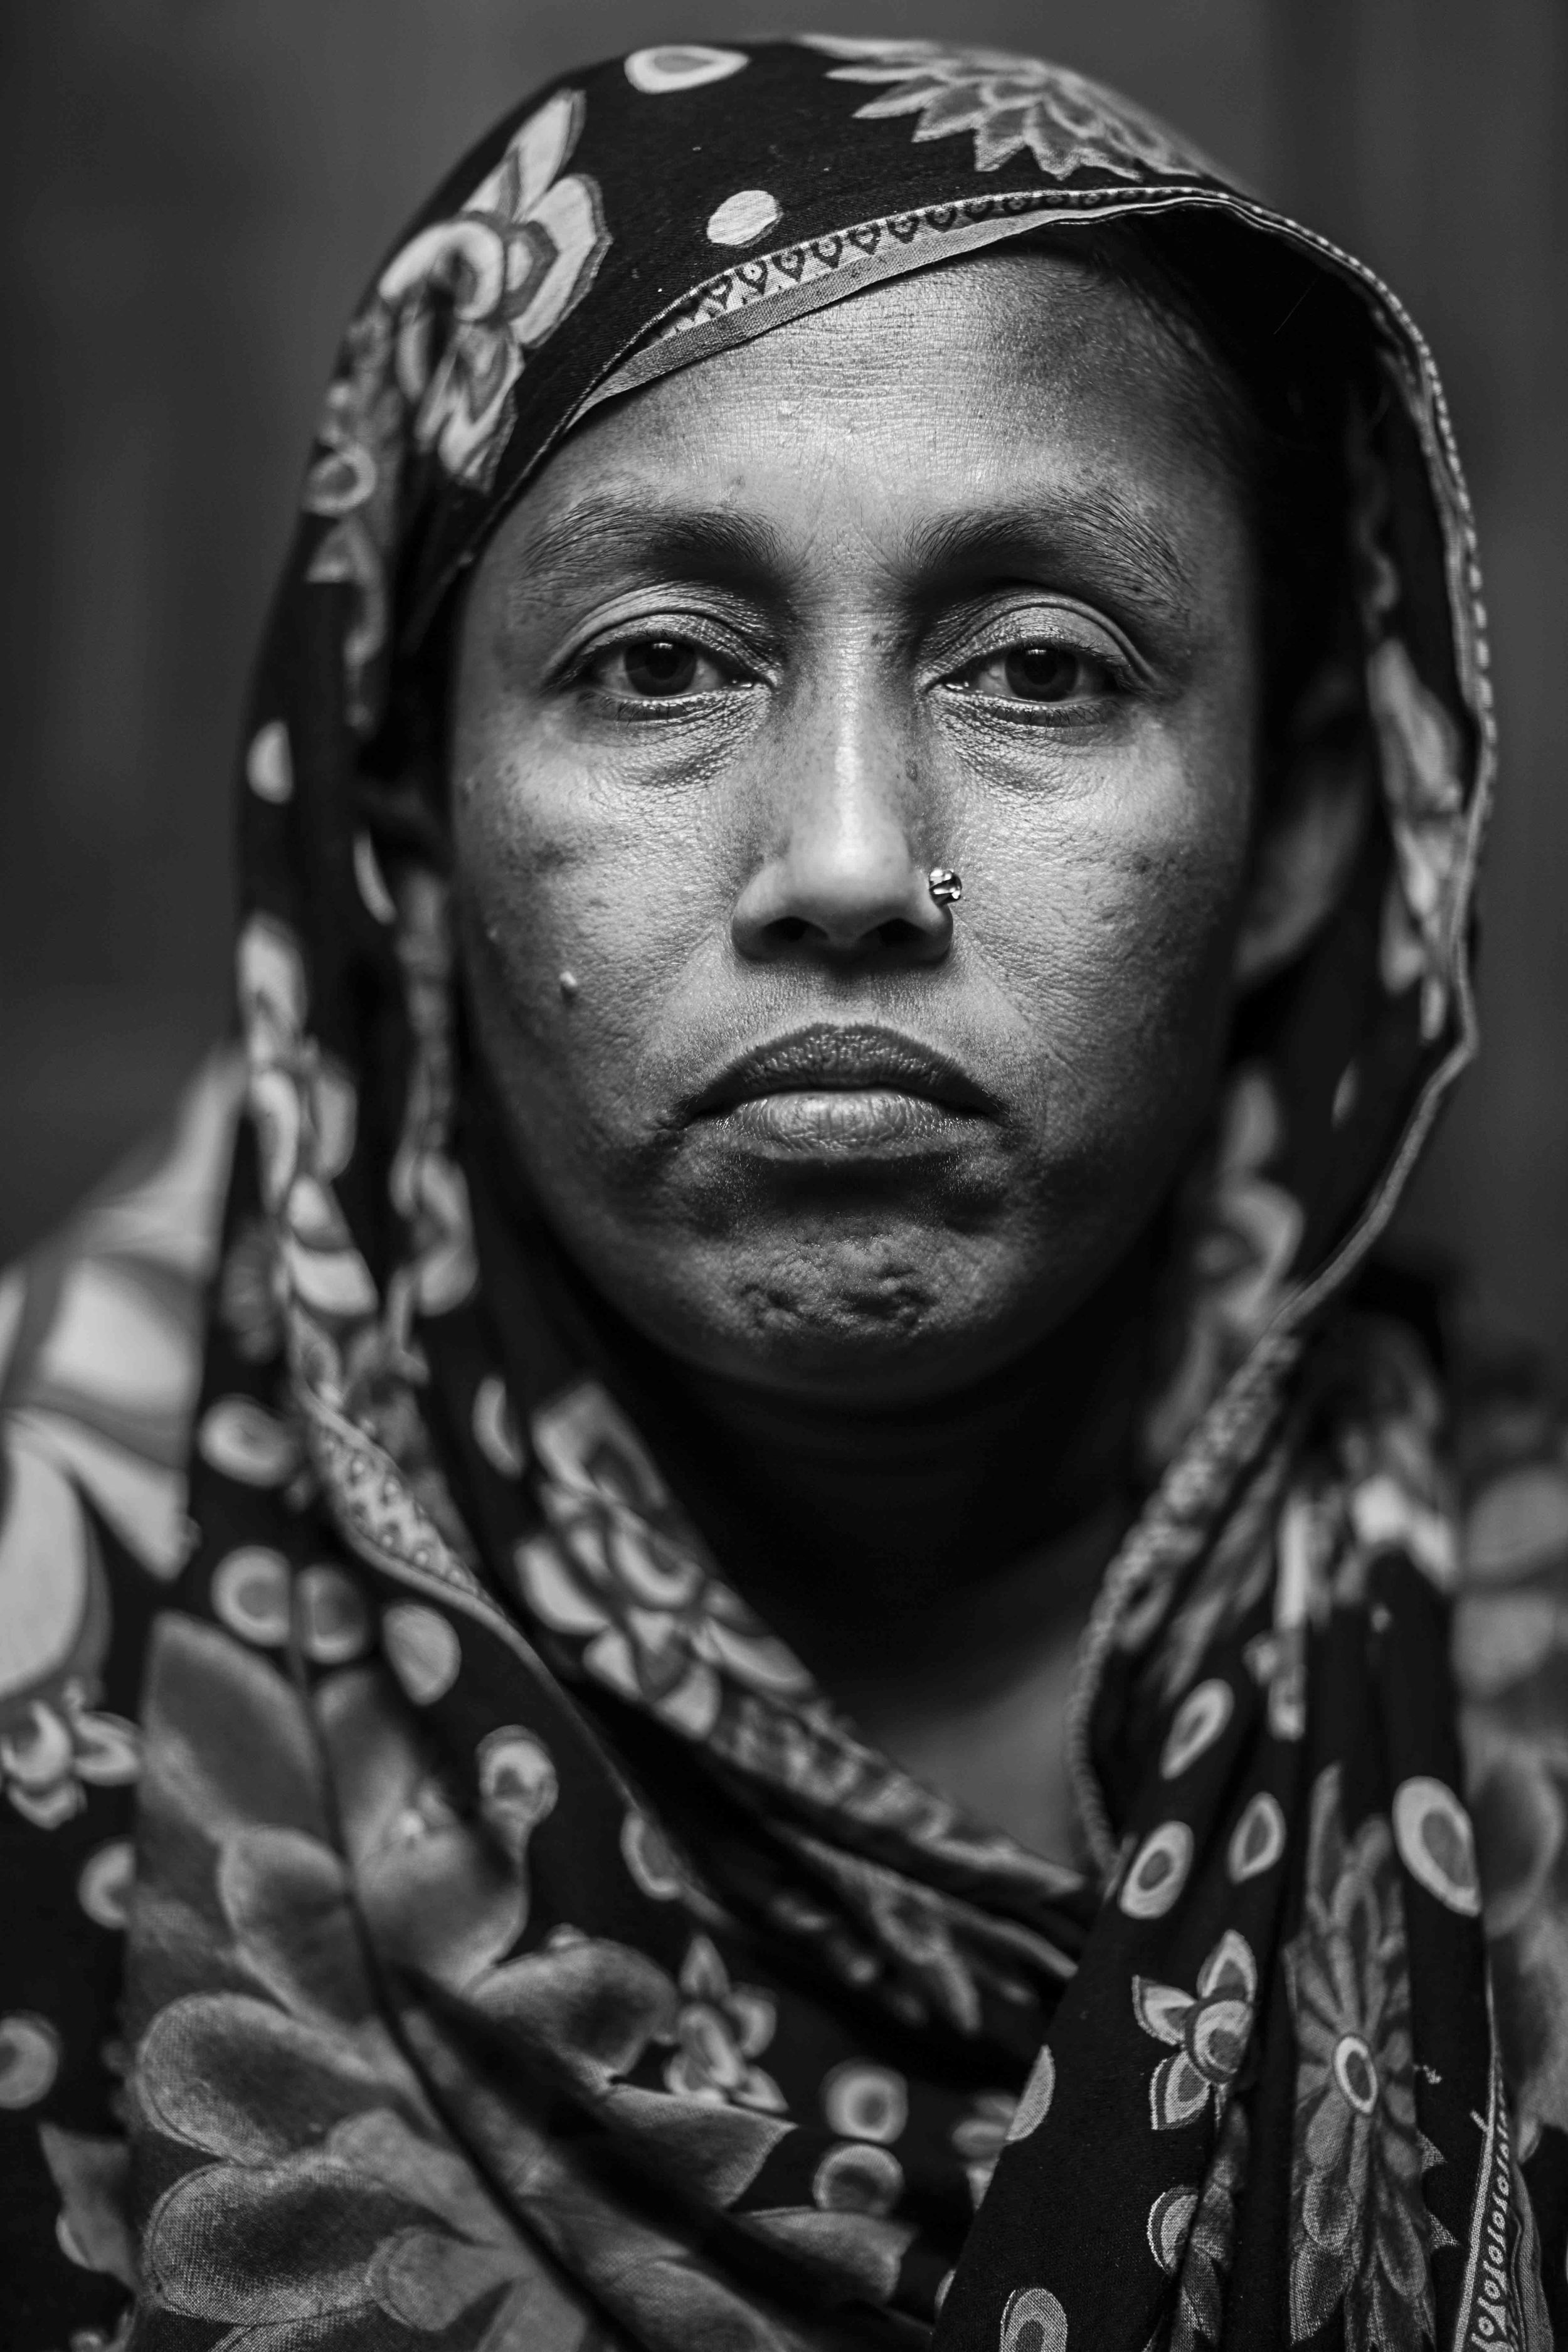  Nasima Begum, wife of Rubel, has been beside her husband’s bed since November. They have two young sons in Comilla and are finding it hard to support their family.      